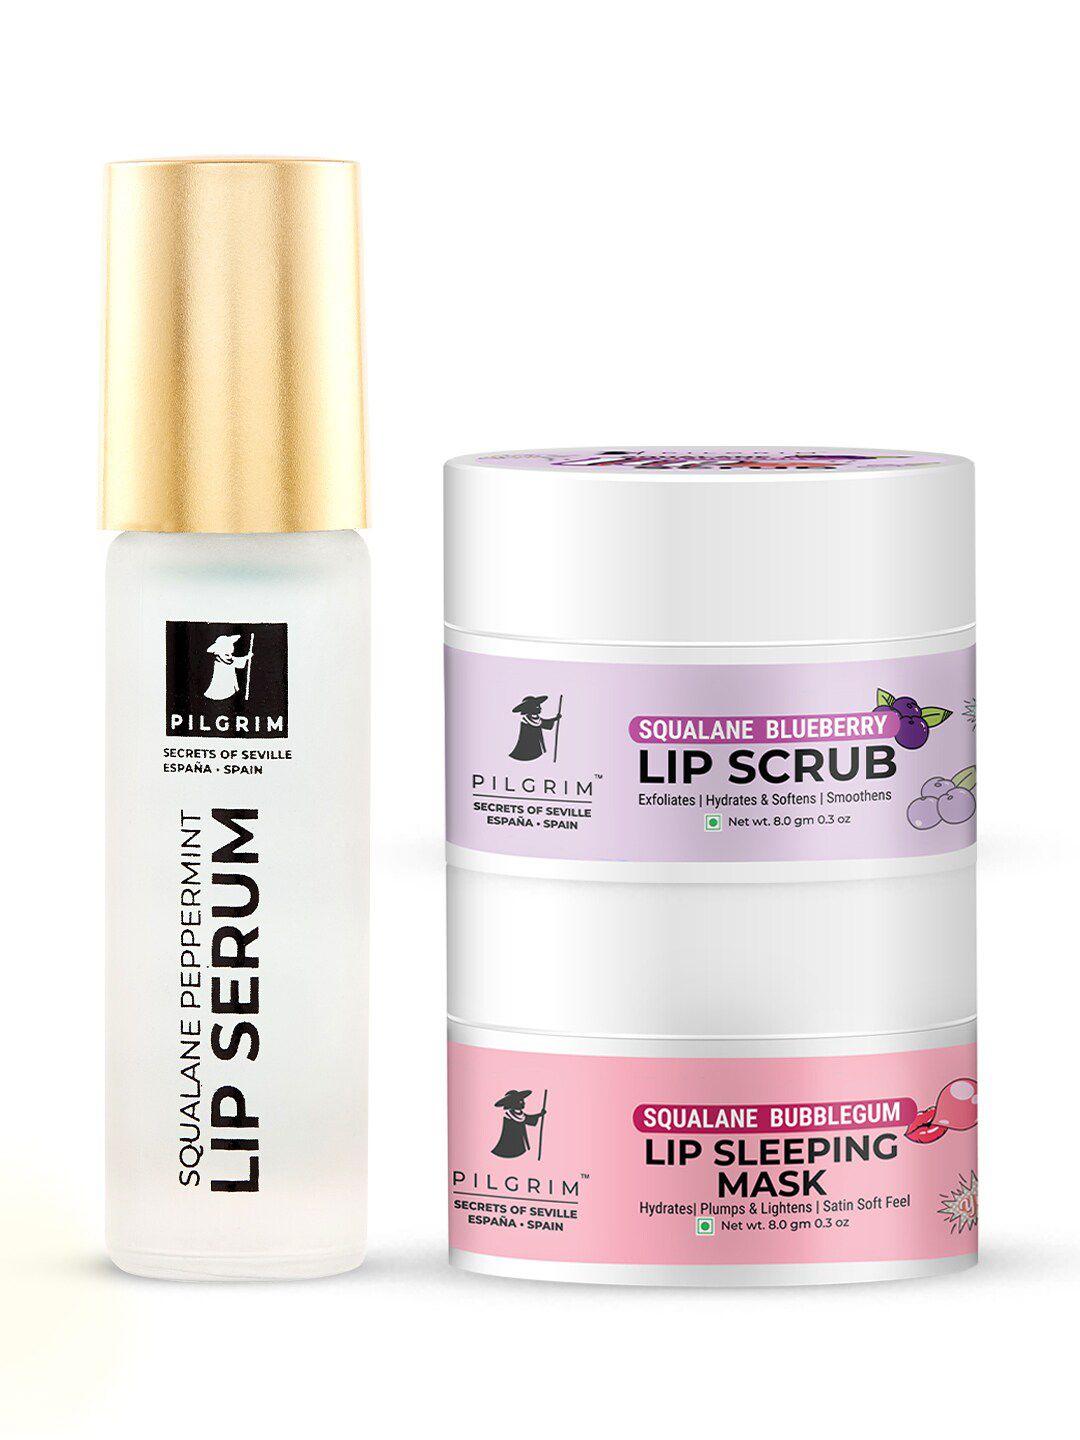 pilgrim squalane perfect pout hydrating lip care kit for soft, plump & fuller lips